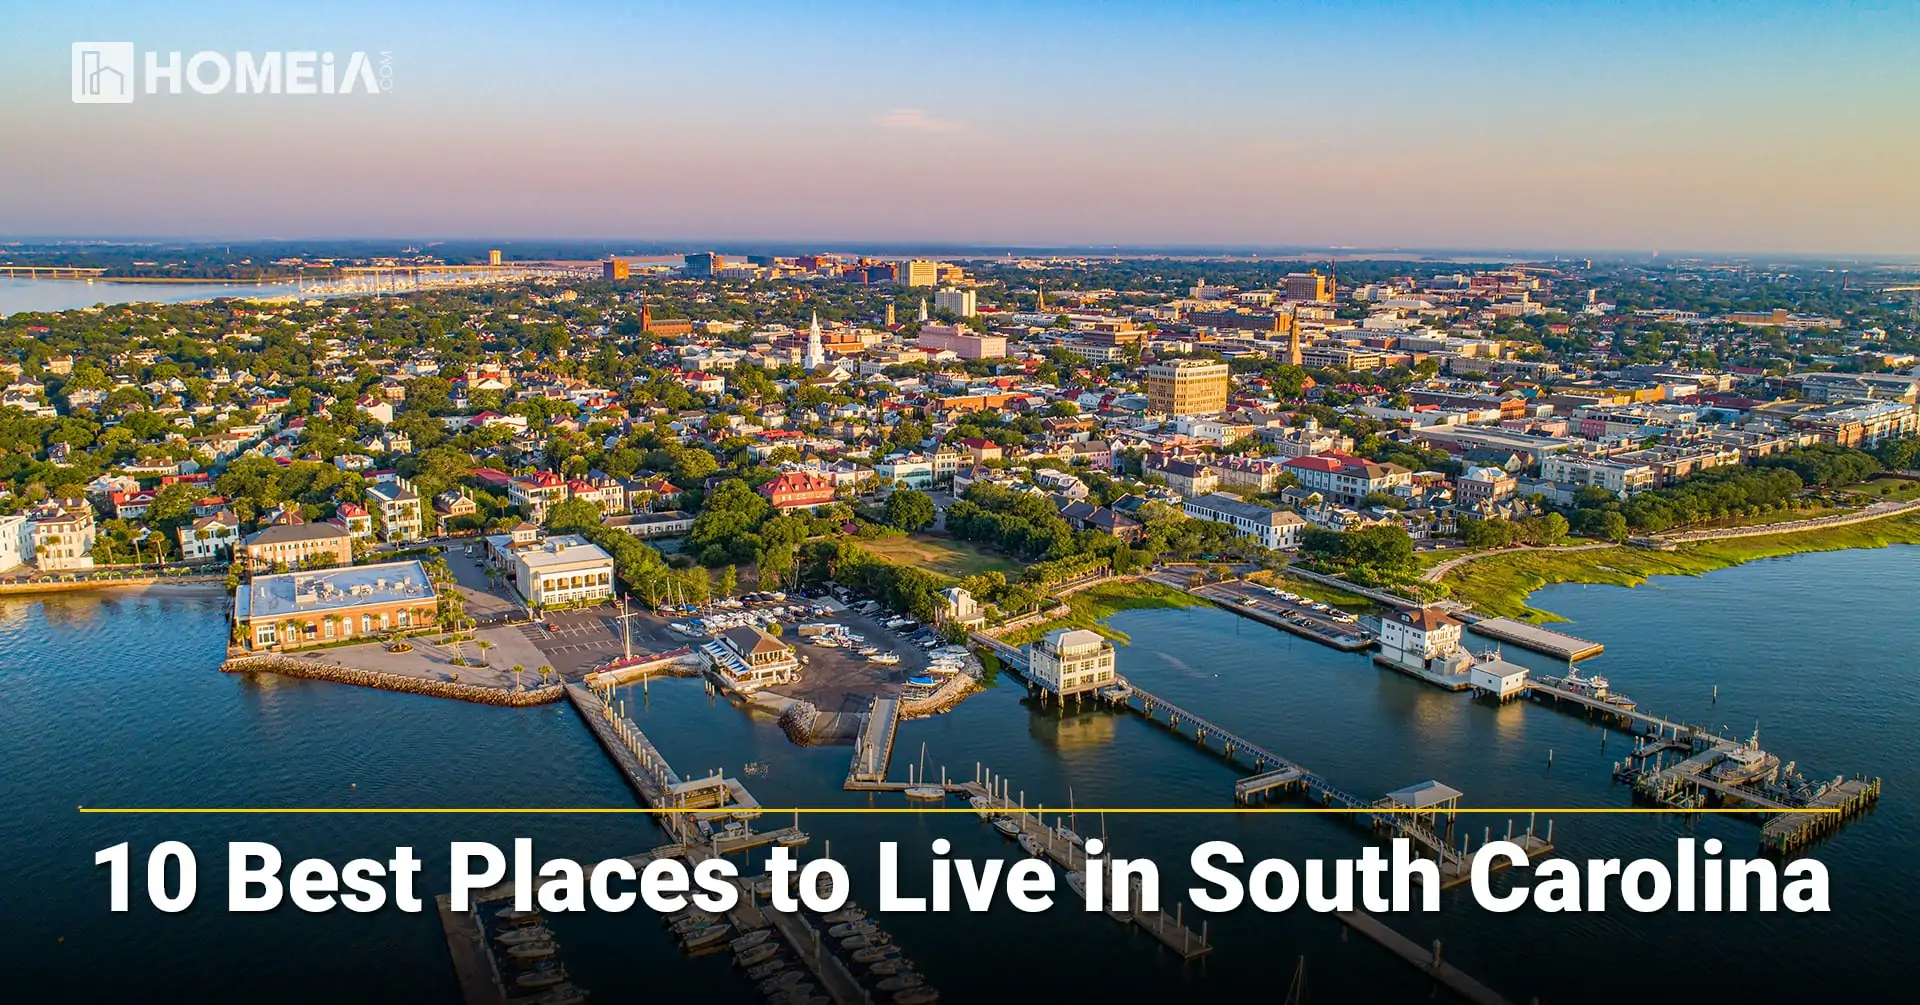 10 Best Places to Live in South Carolina for Families